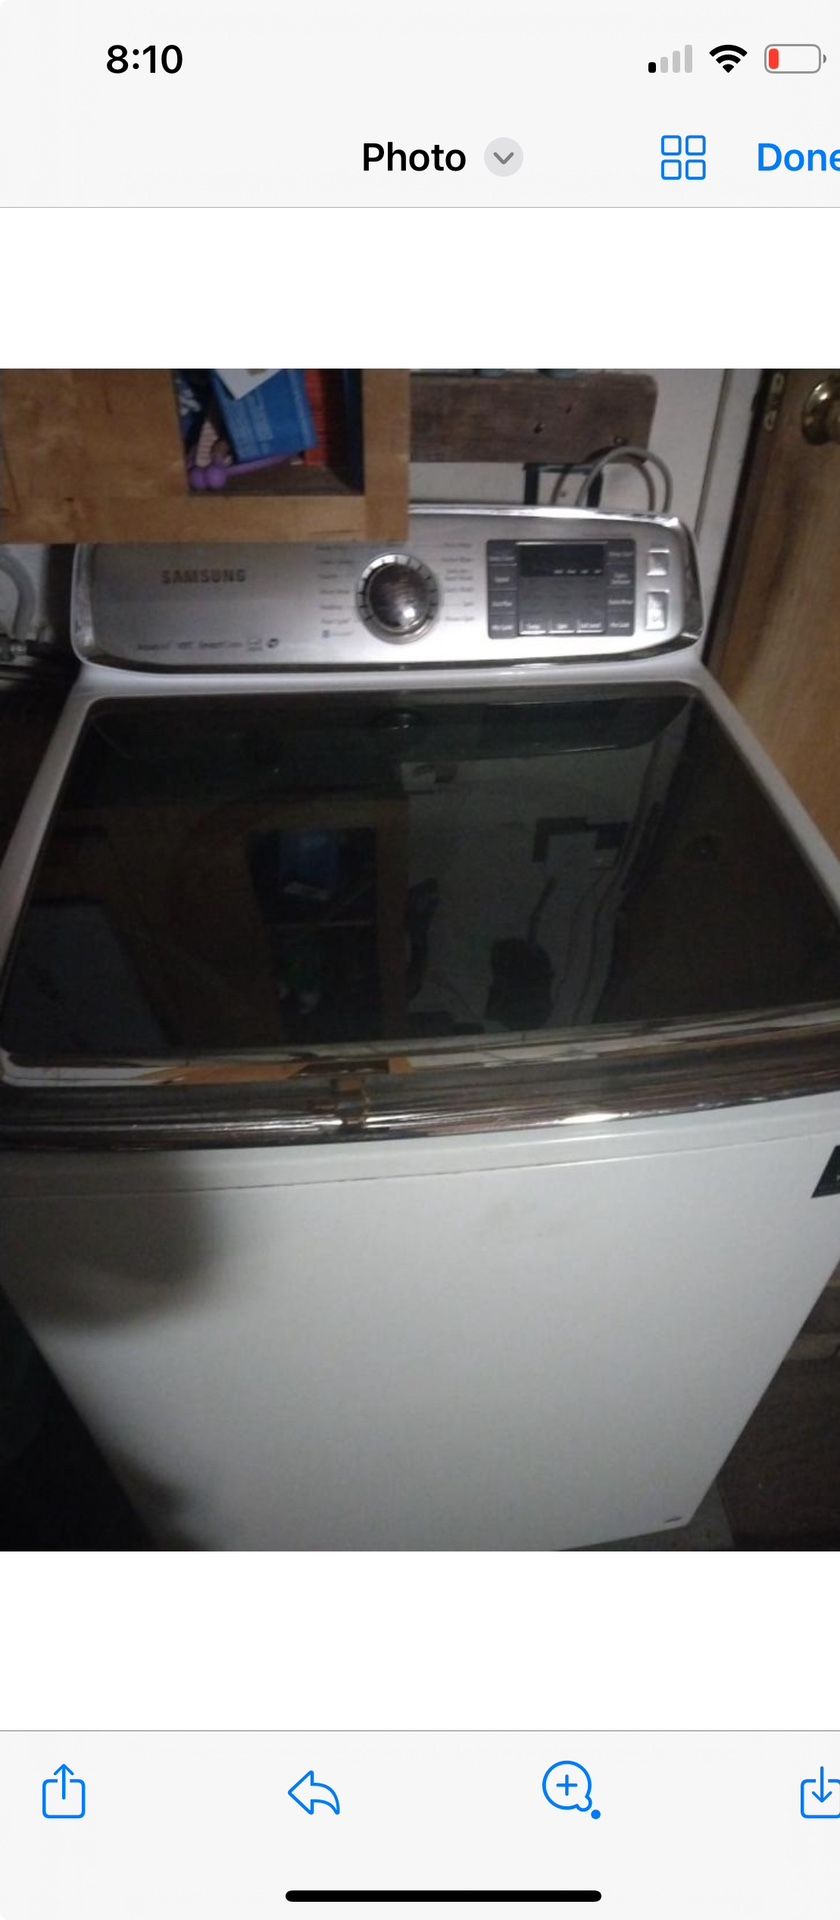 The Washer And Dryer 